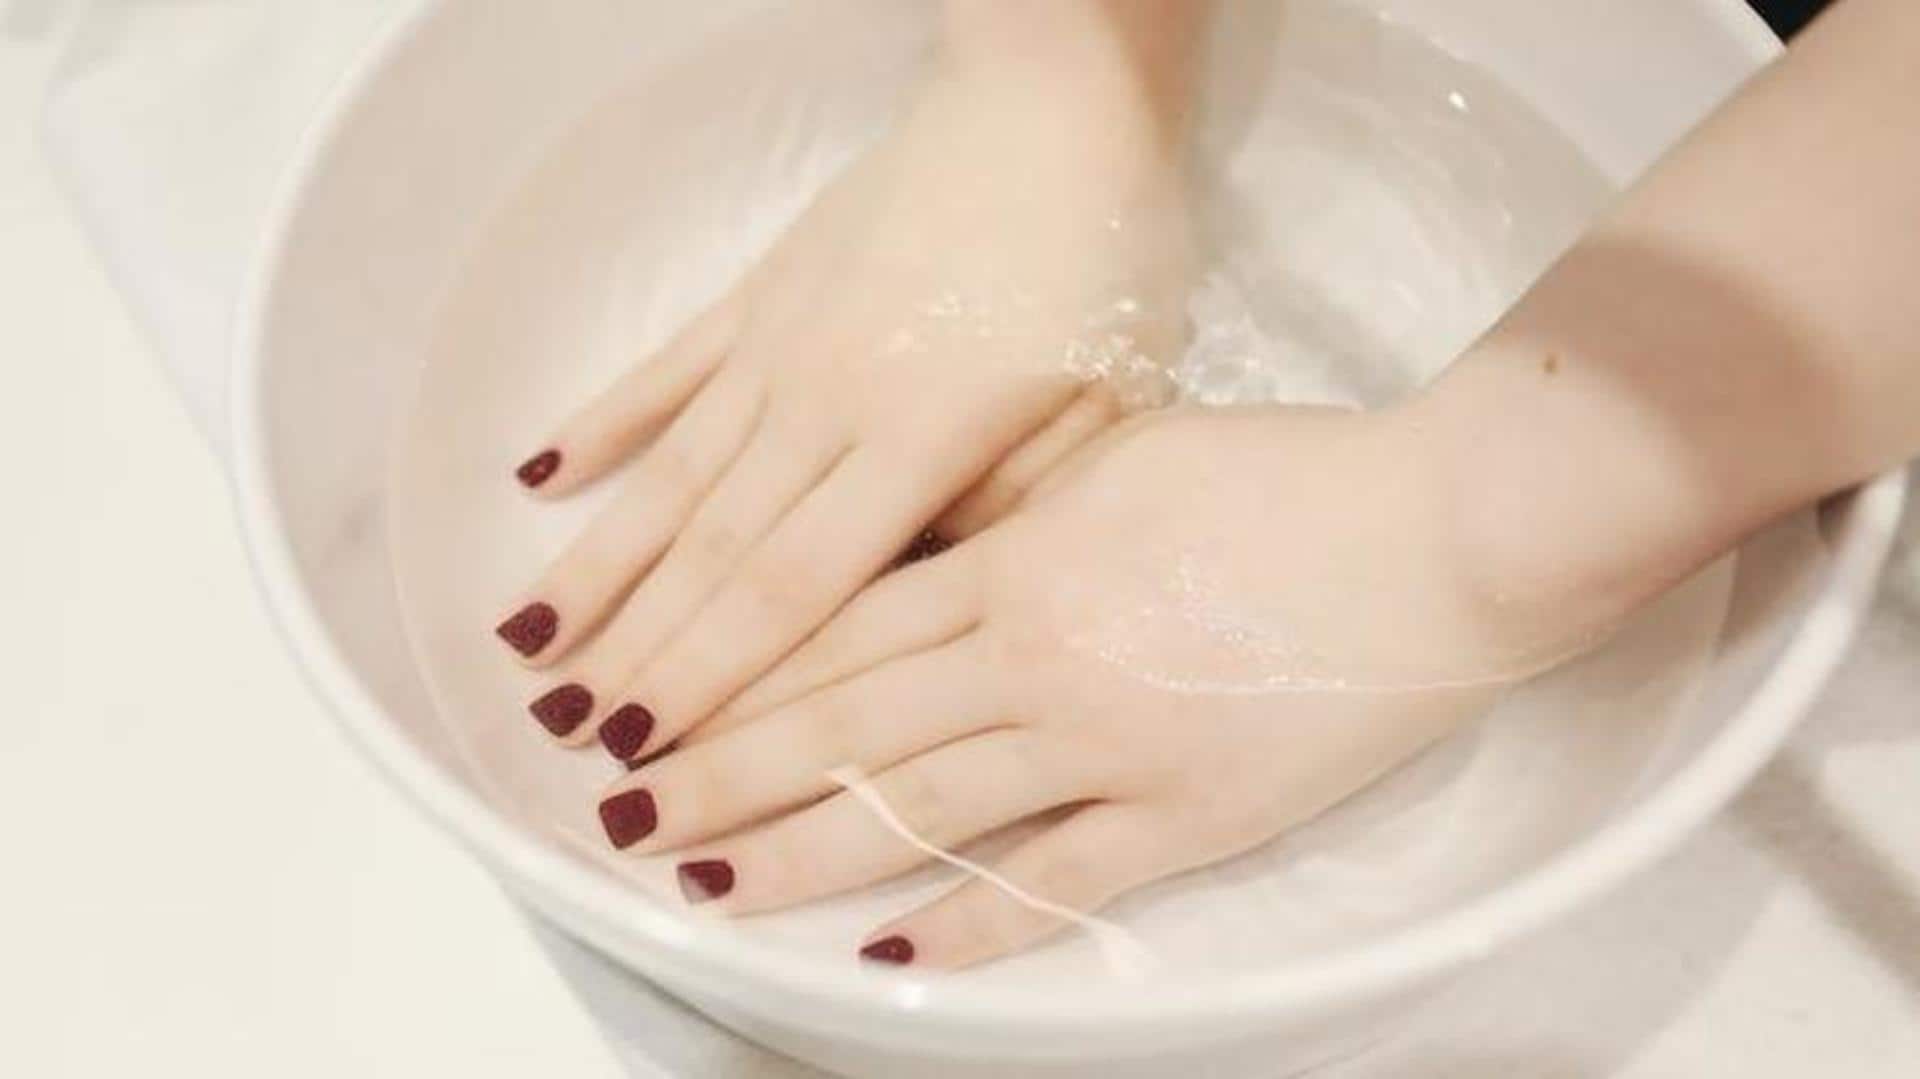 Here's why you should get a manicure and pedicure done